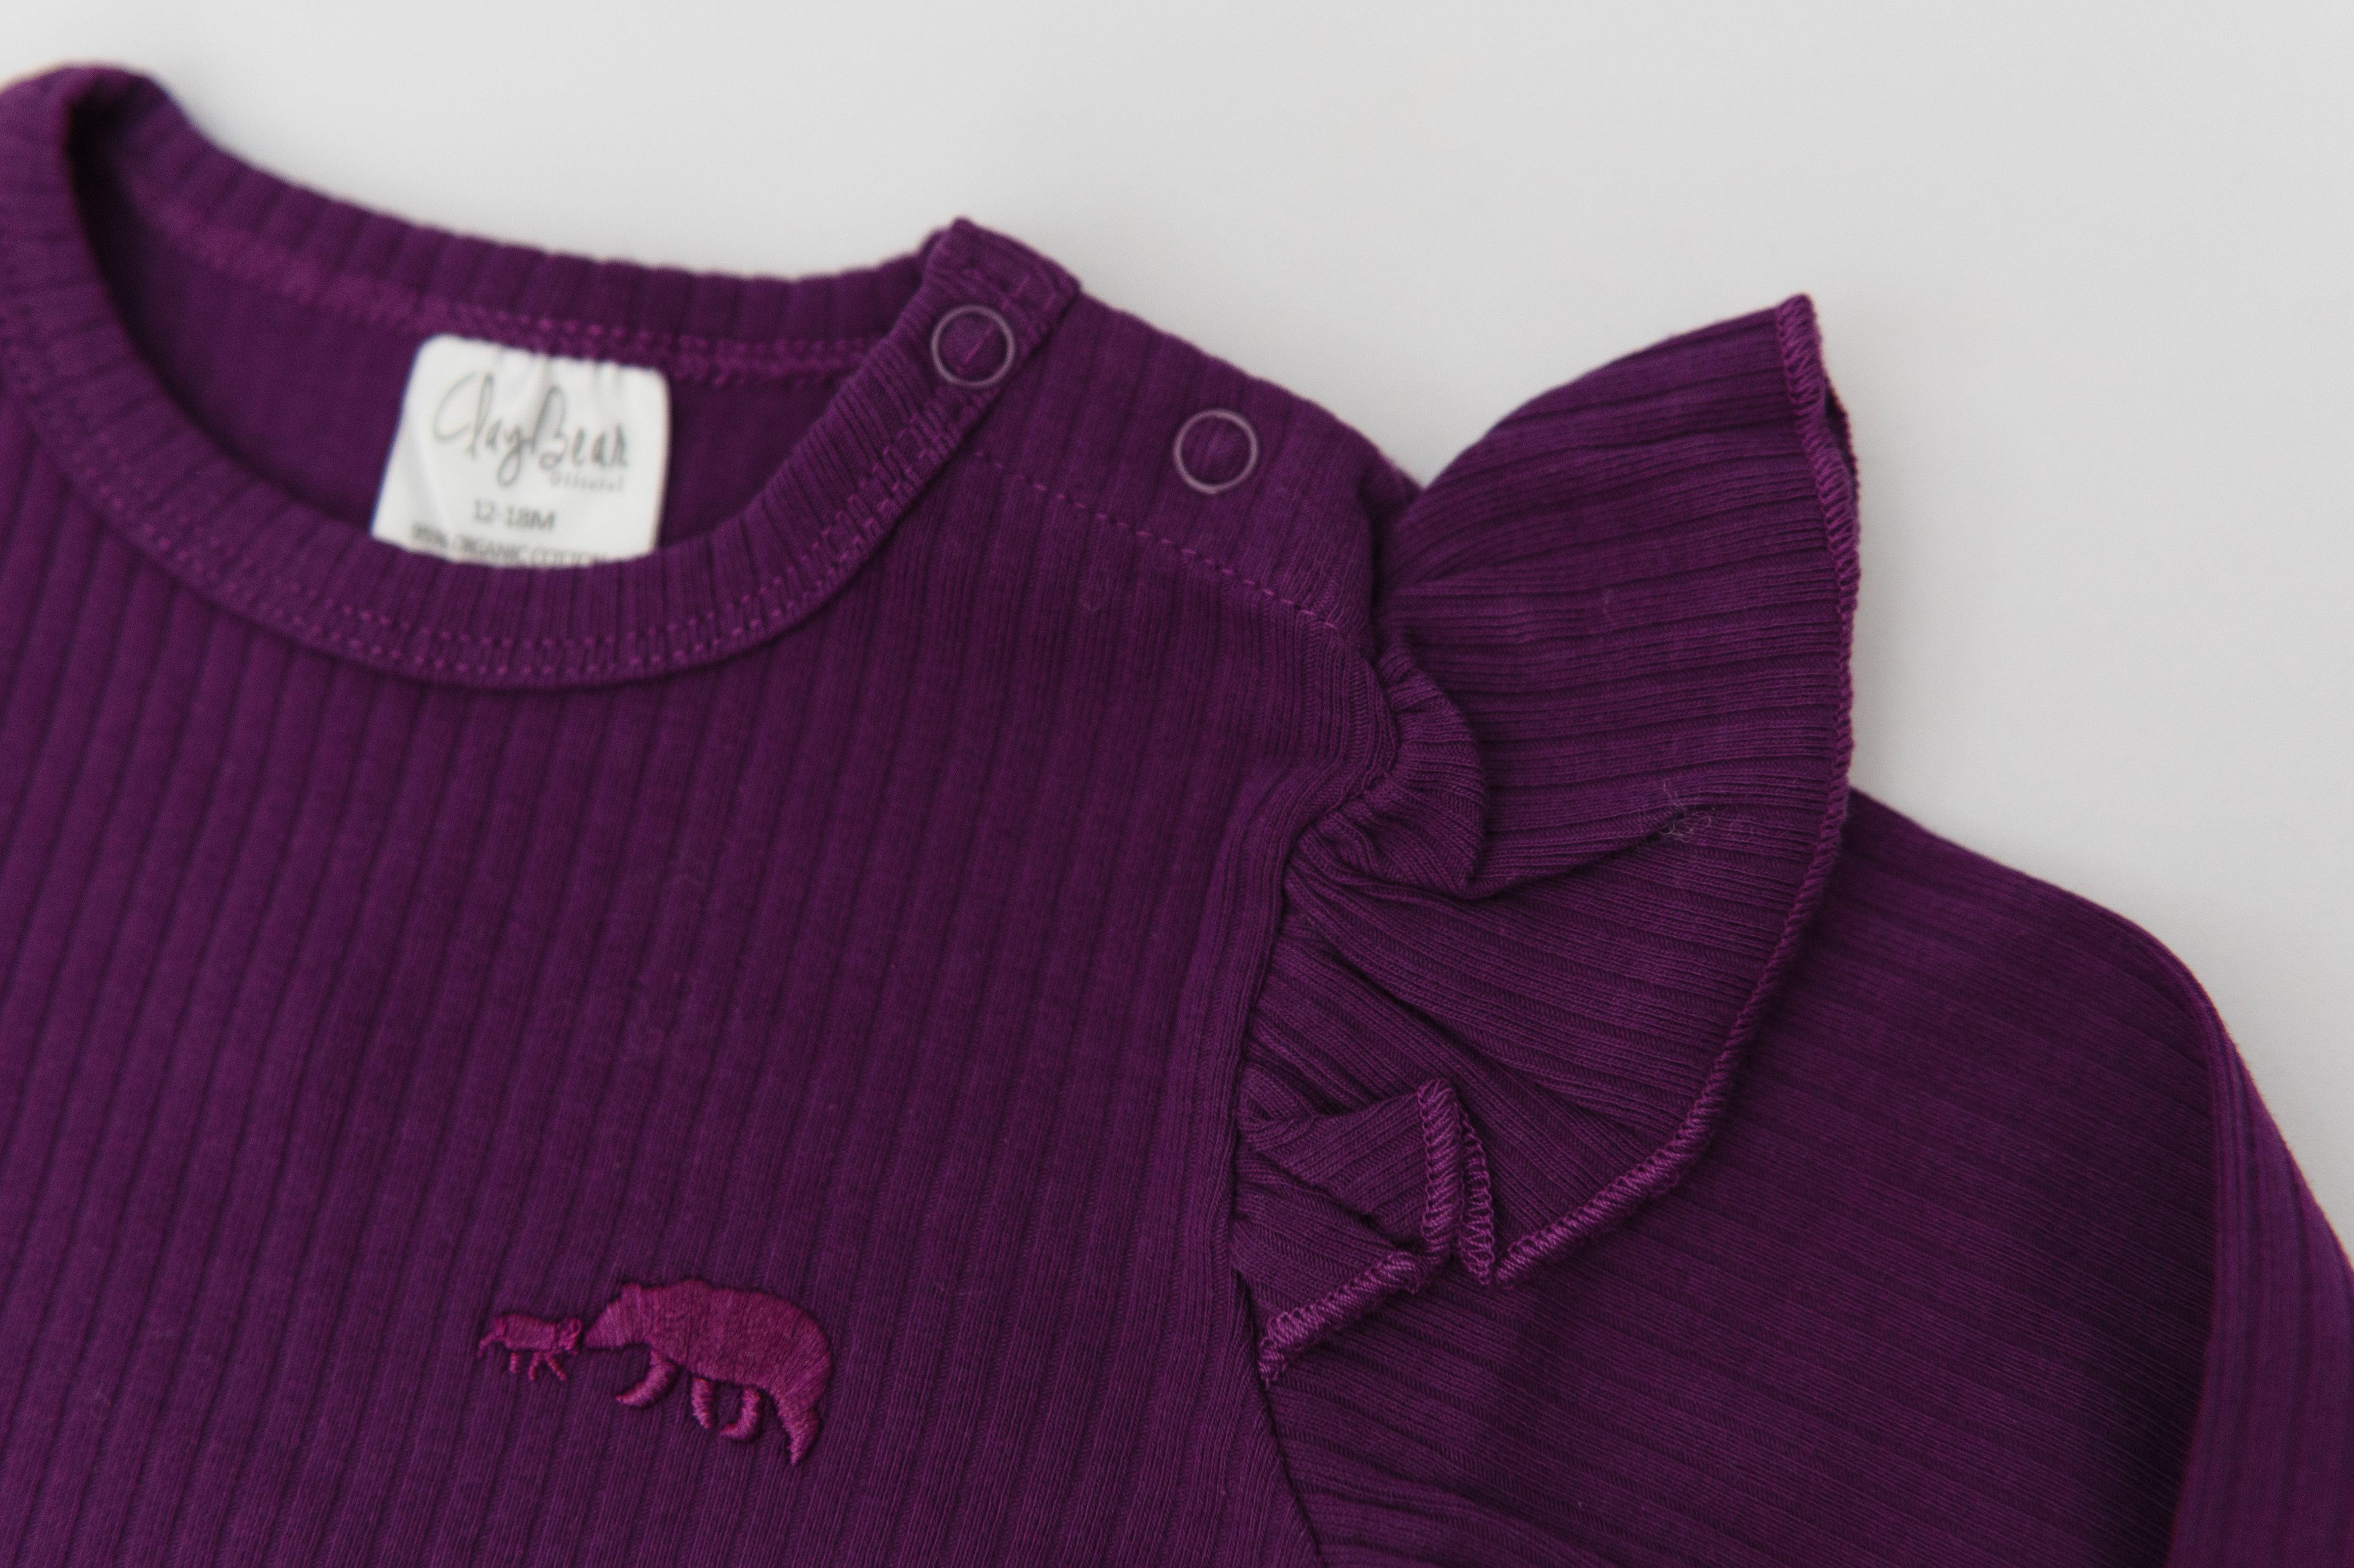 files/claybare-deep-purple-frill-ribbed-long-sleeve-top-claybearofficial-5.jpg